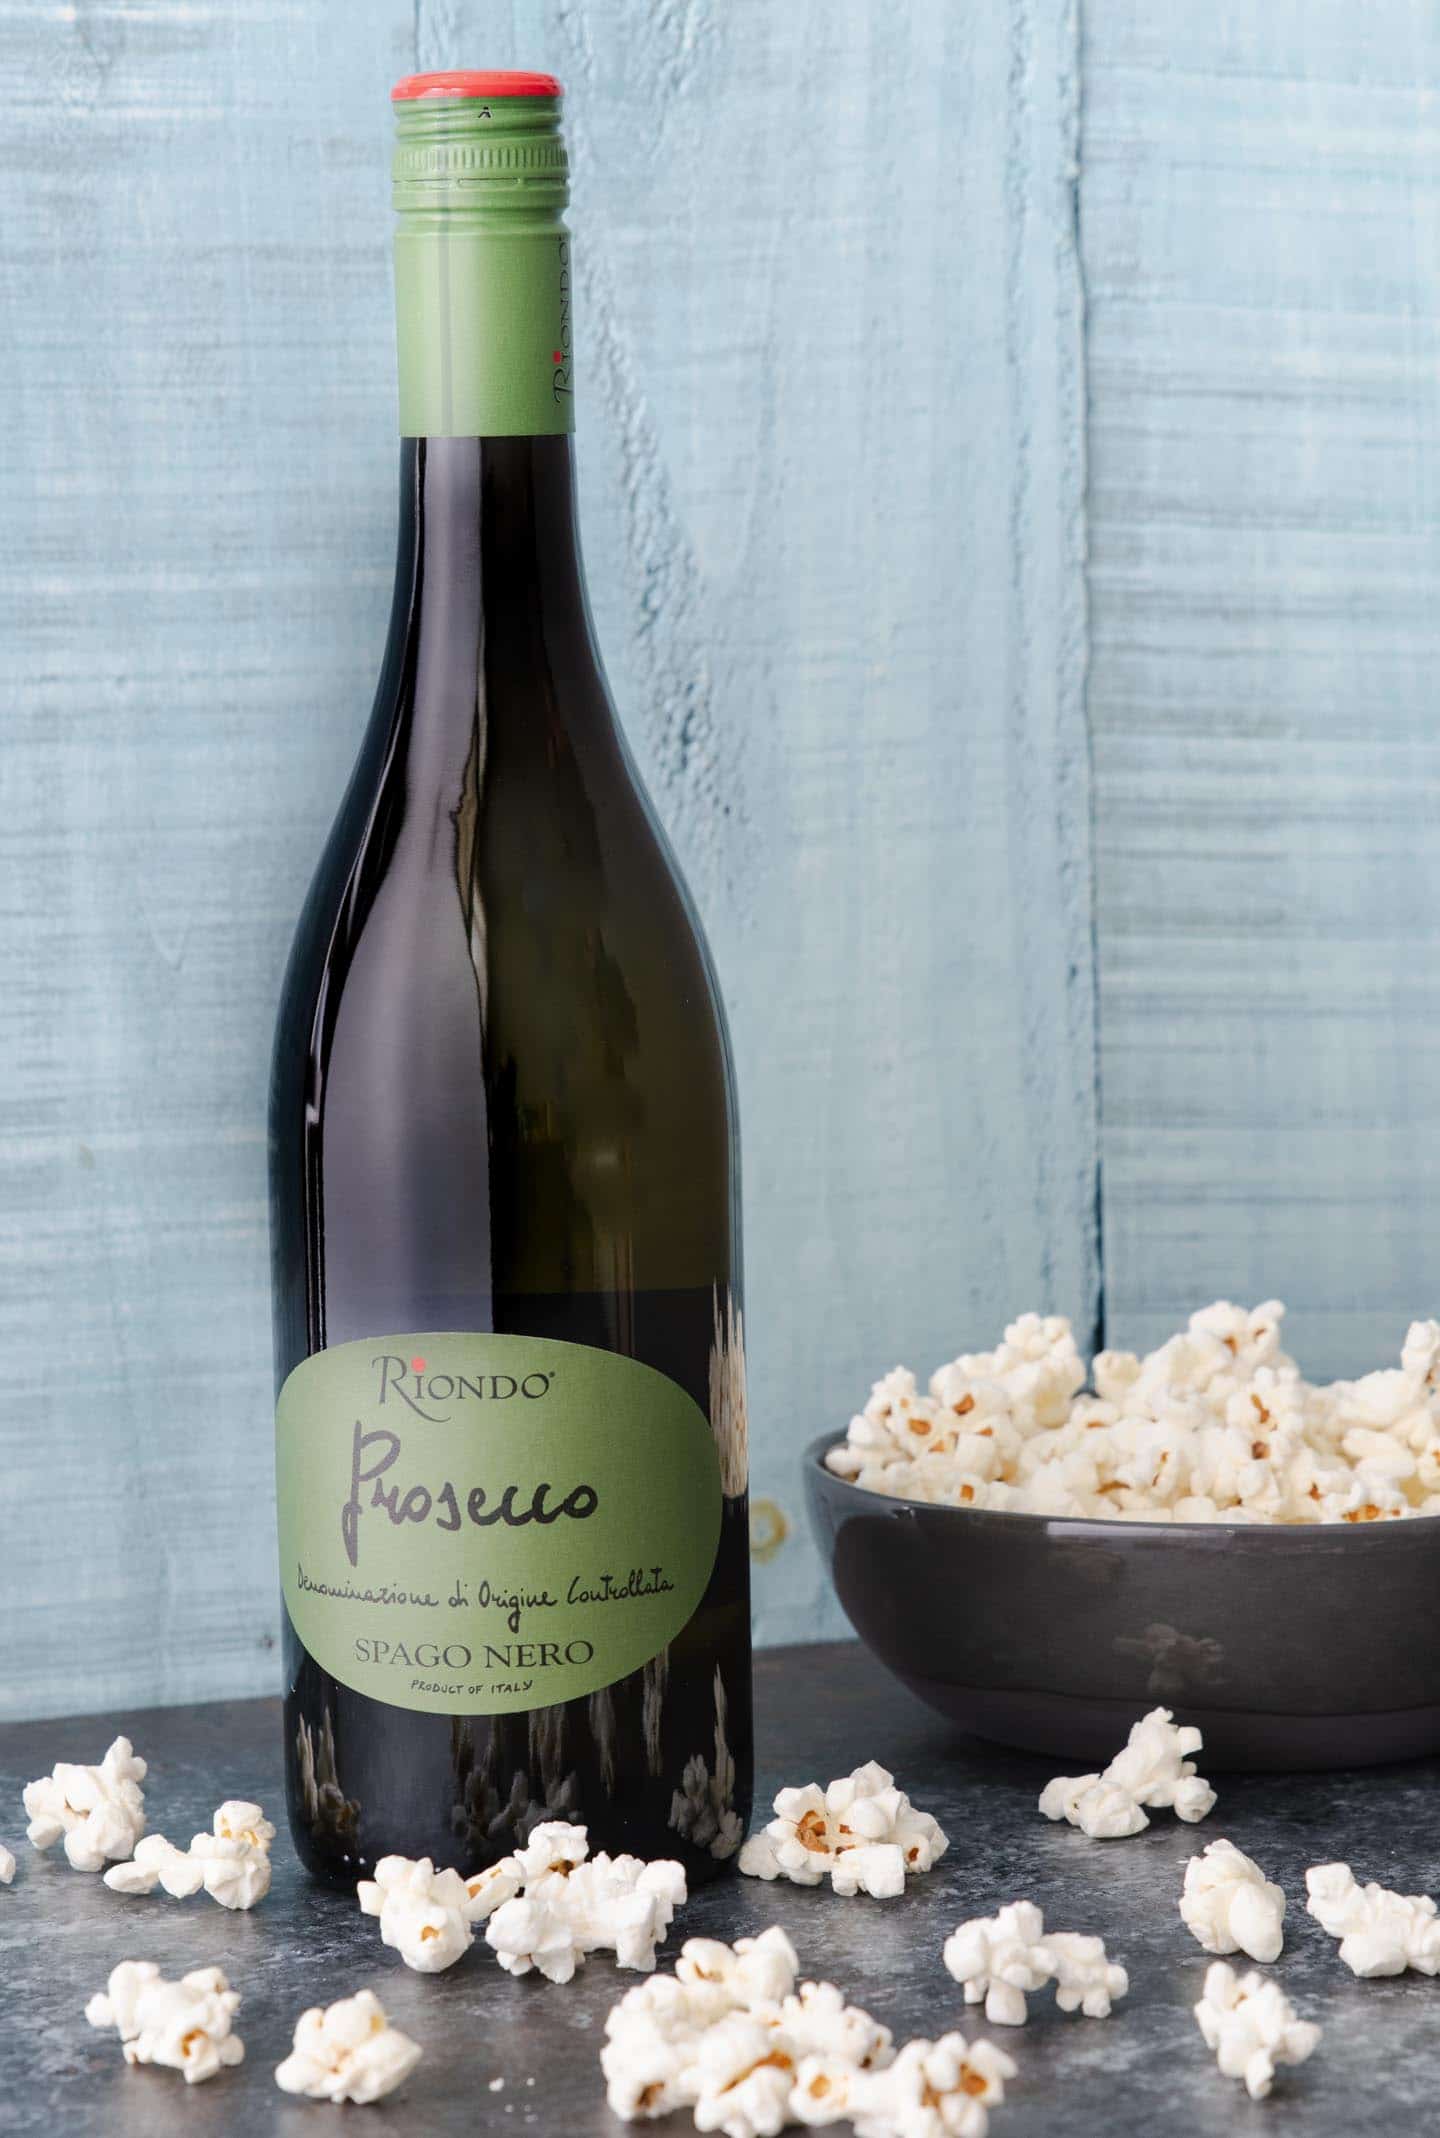 Riondo prosecco bottle with popcorn bowl and scattered popcorn